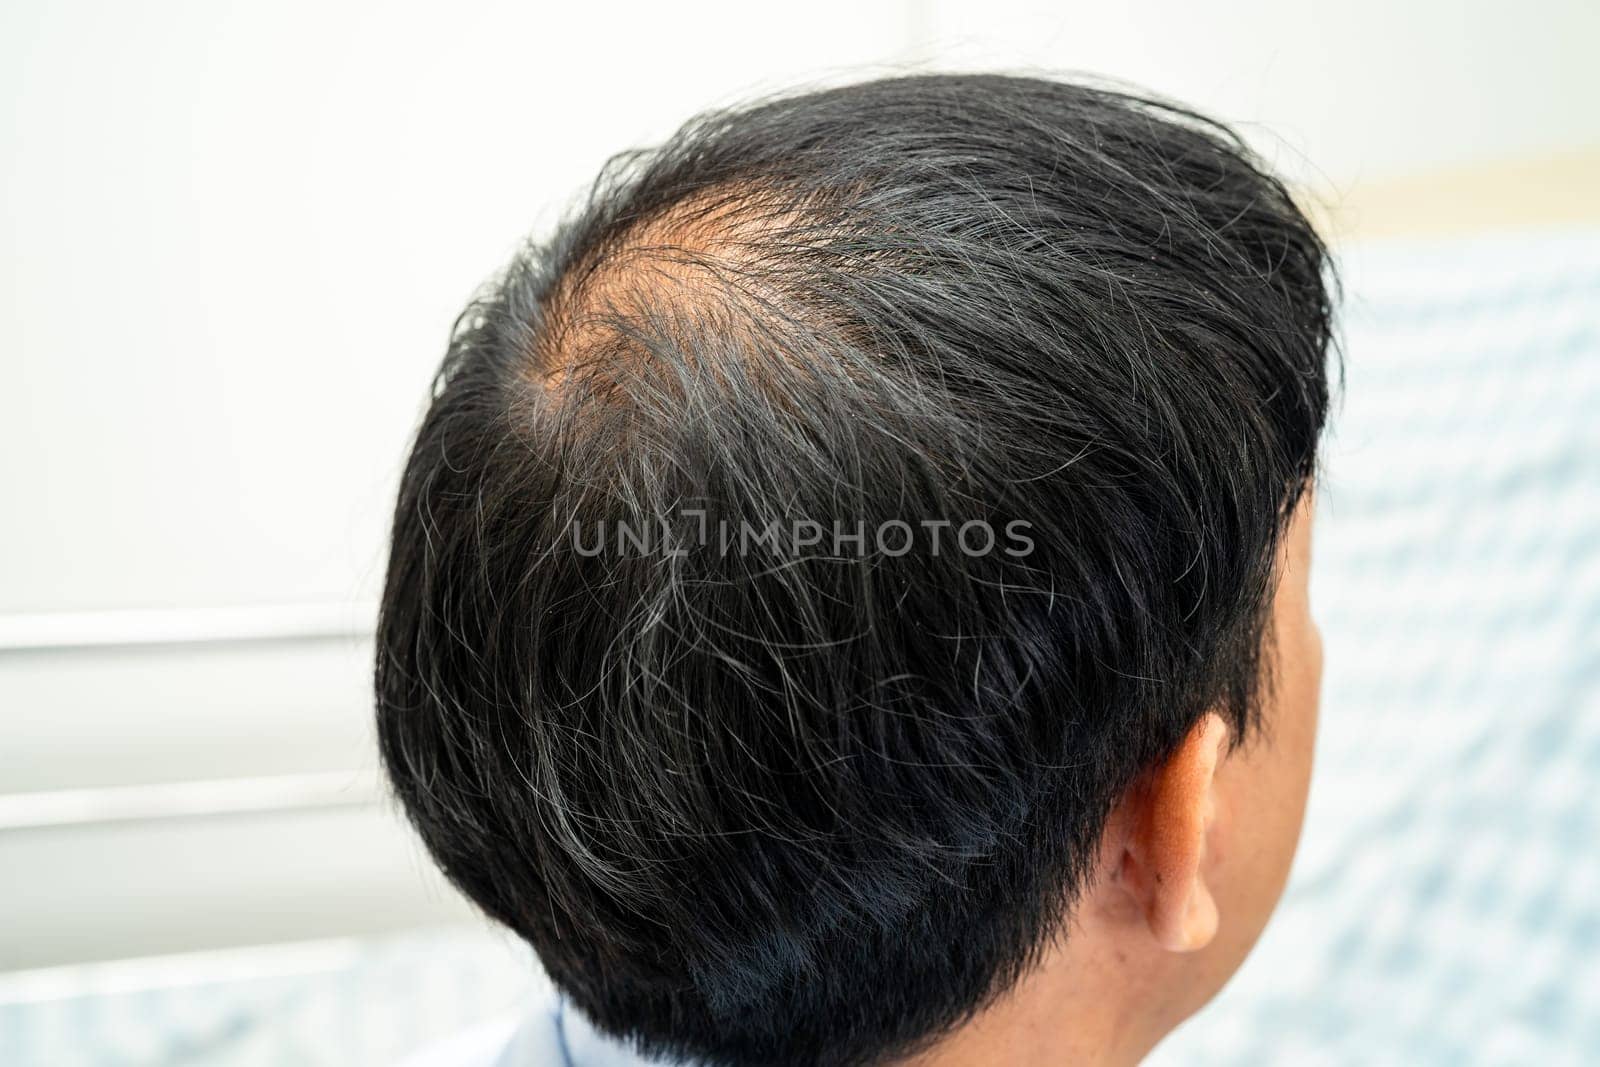 Bald at front of head and begin no loss hair glabrous of mature Asian business smart active office man. by pamai